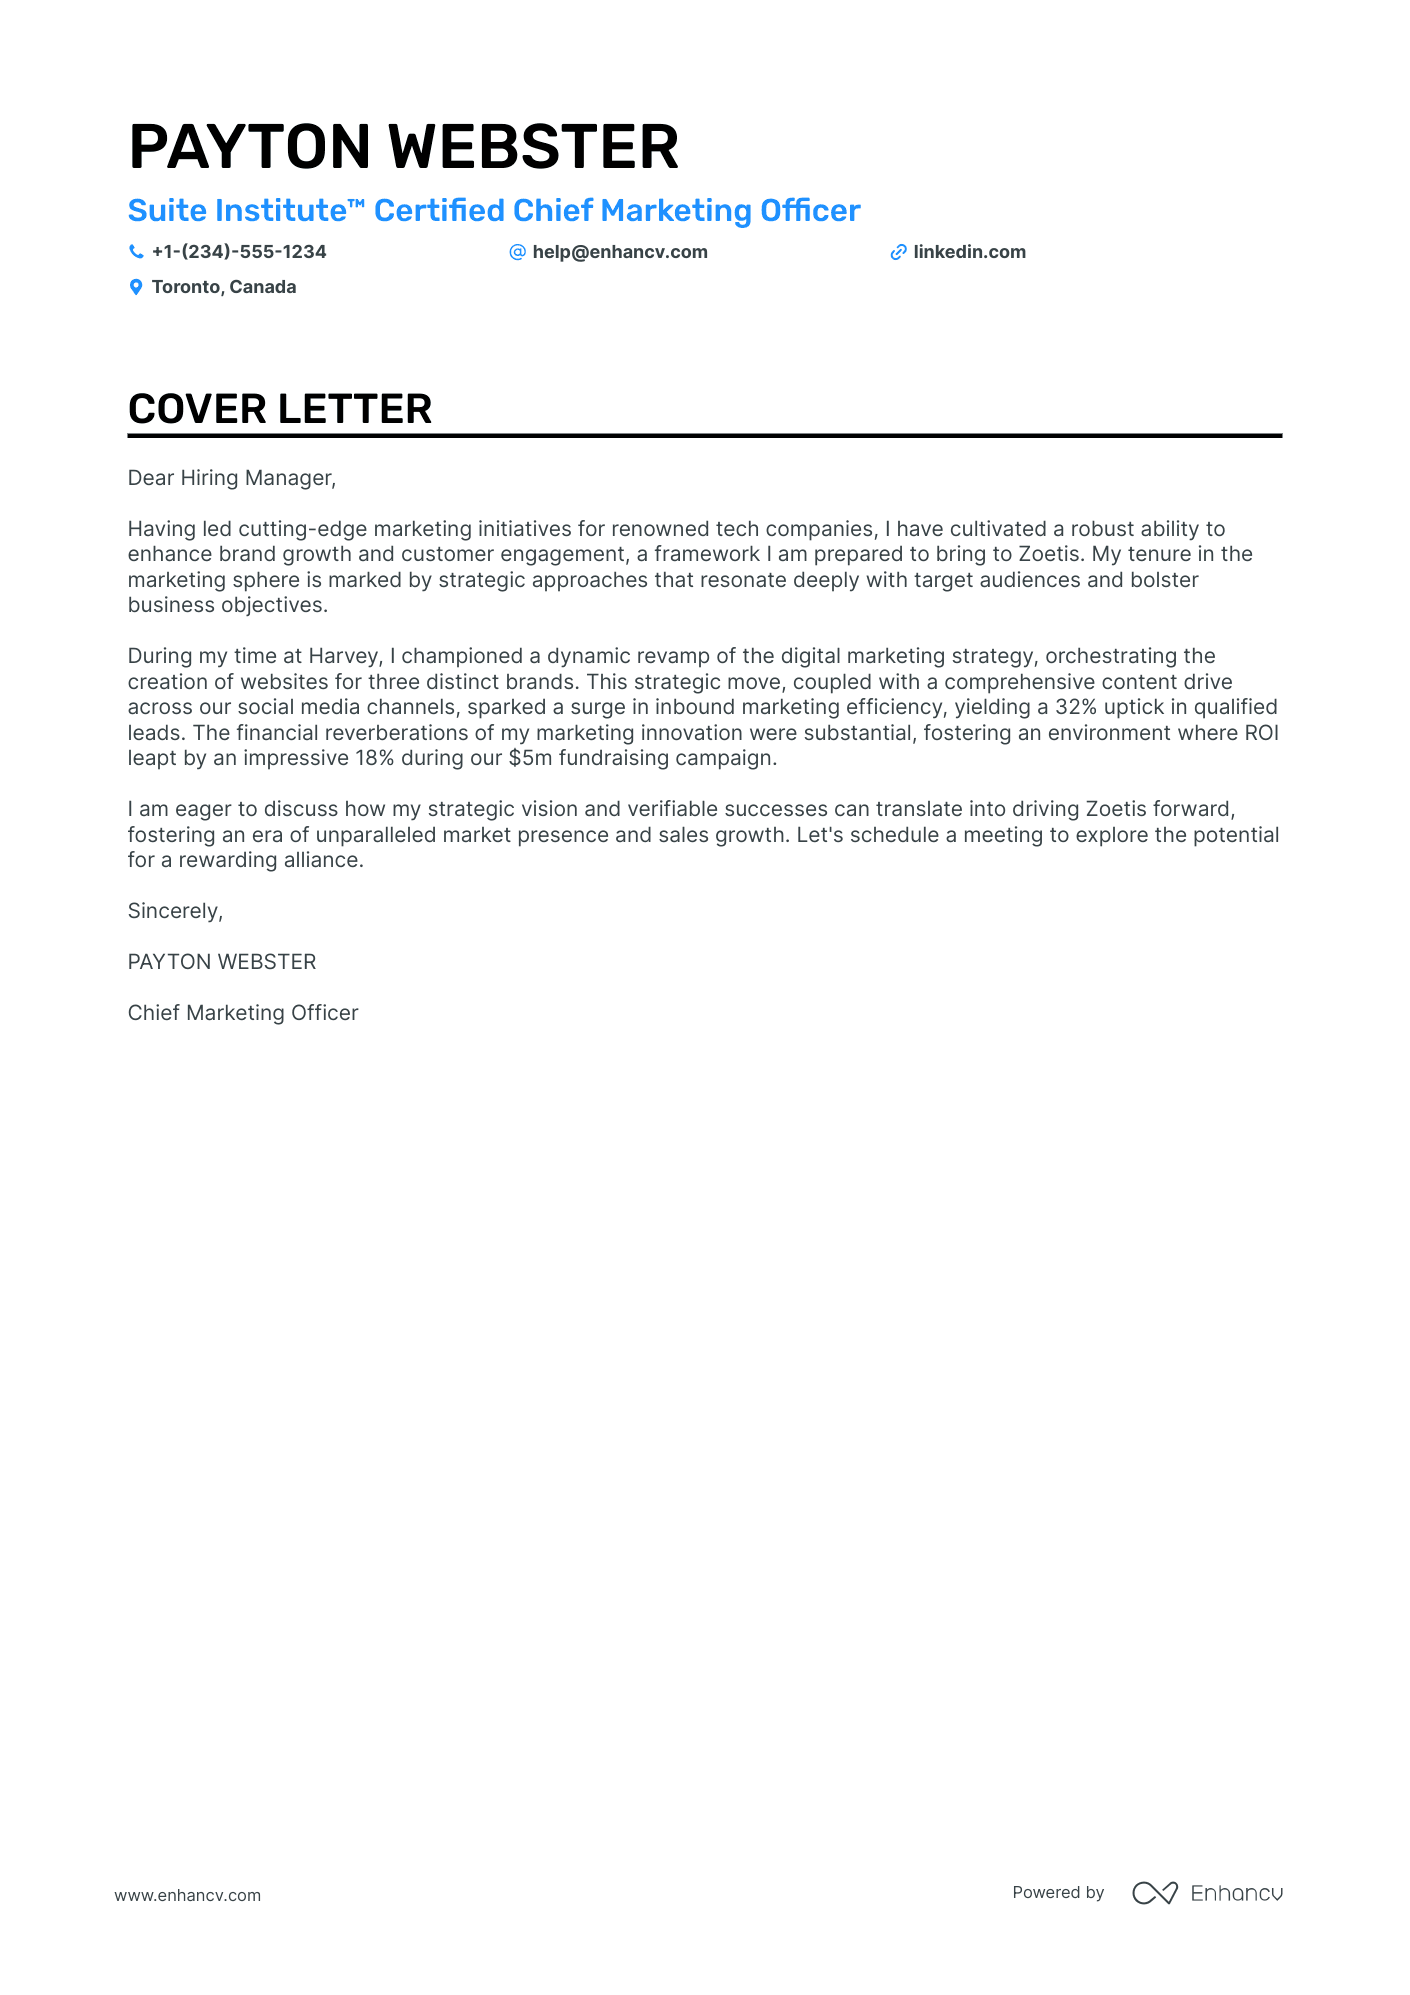 Chief Marketing Officer cover letter